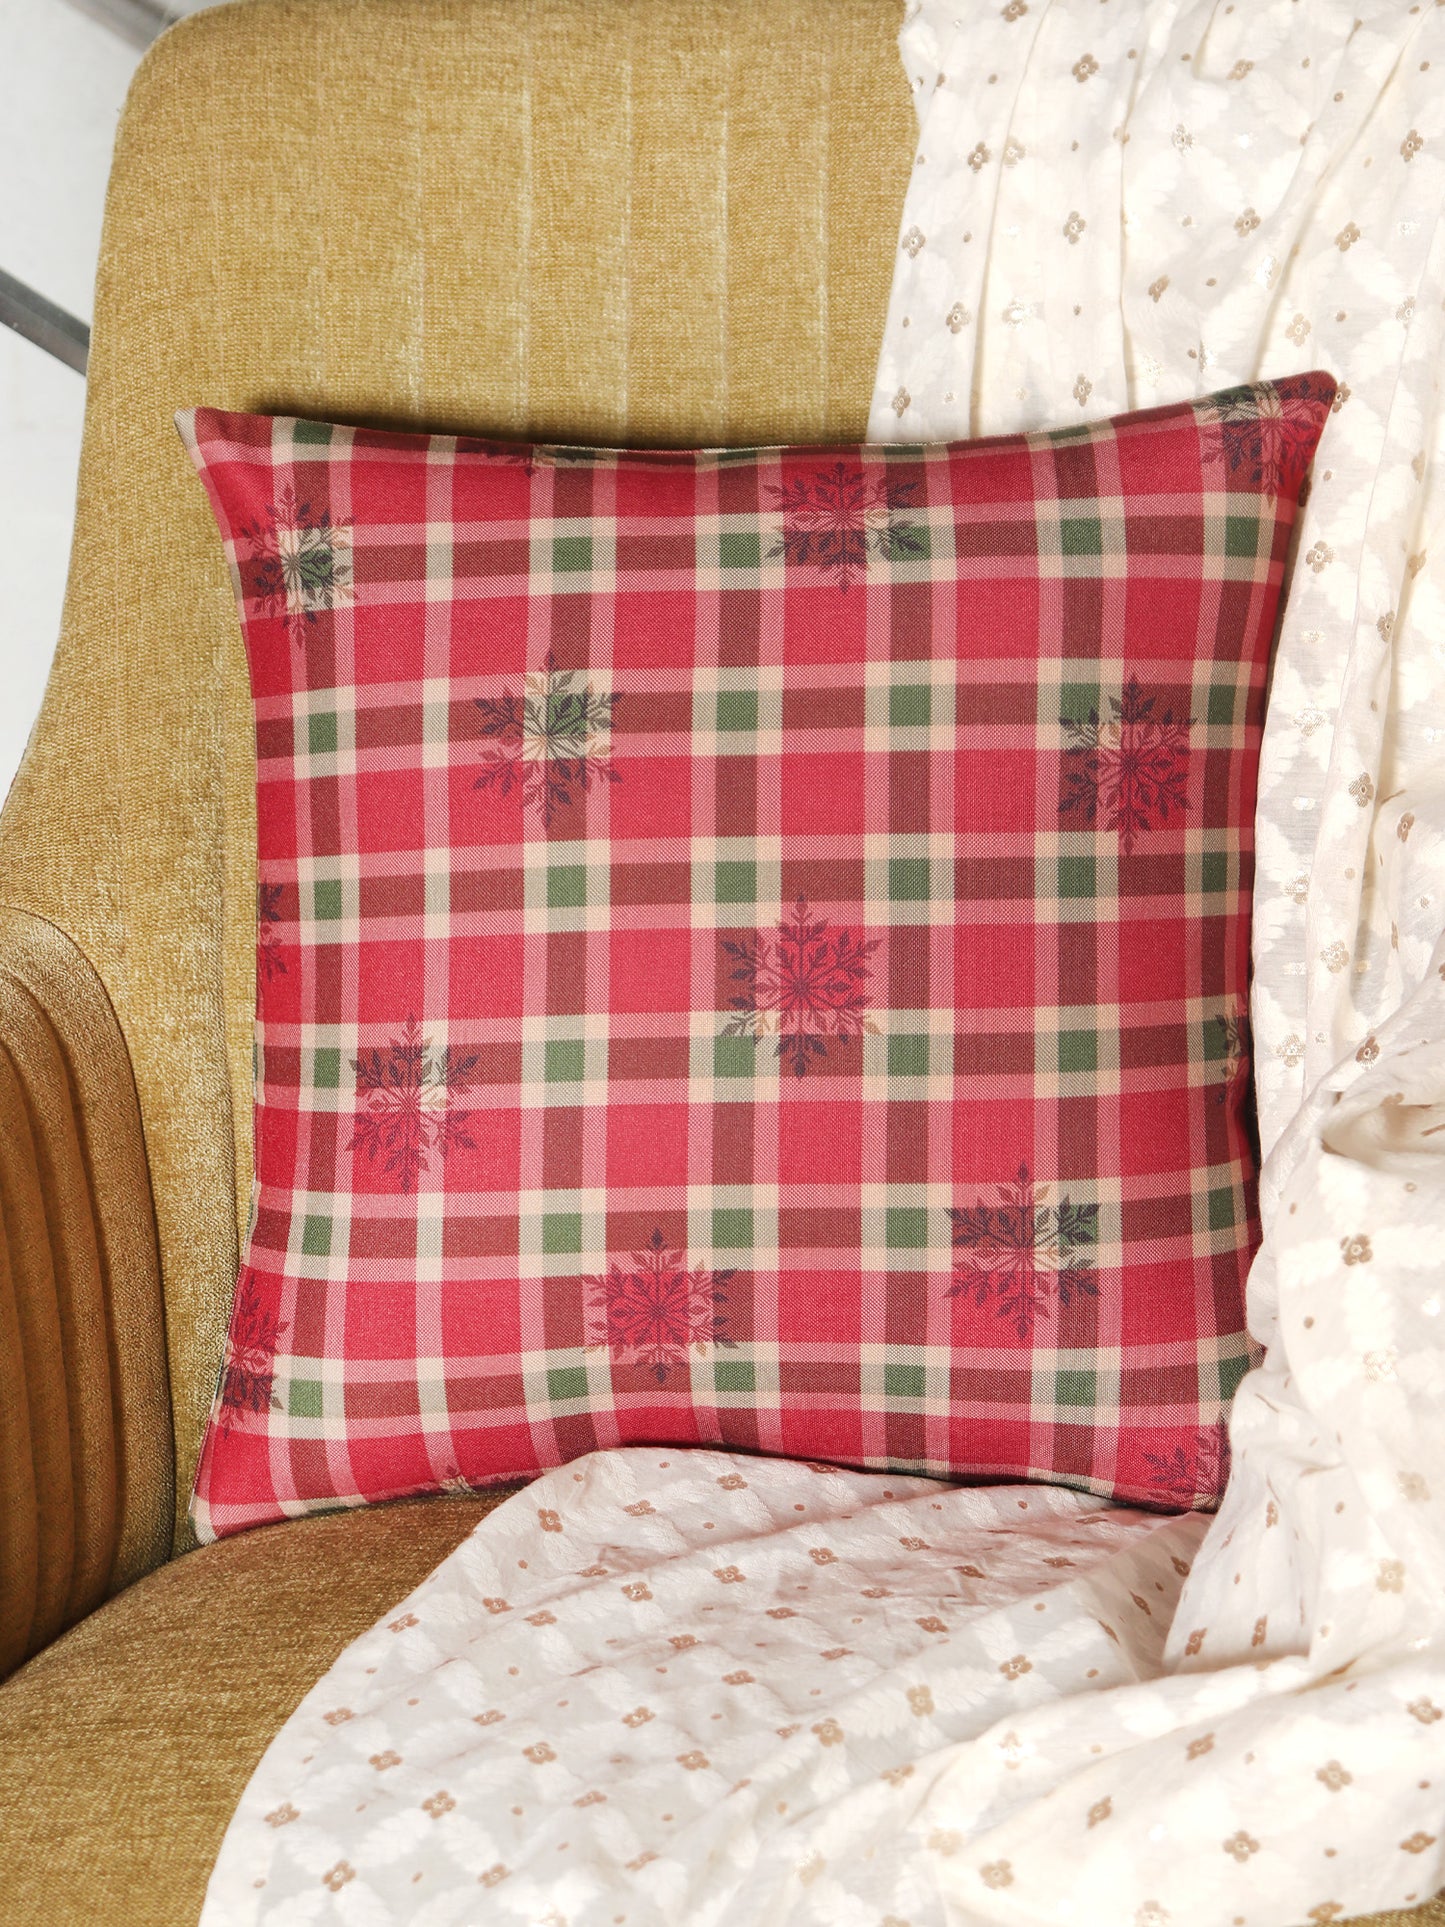 Reversible Cushion Cover Polycanvas Digital print Checks with Snowflakes Red - 16" X 16"